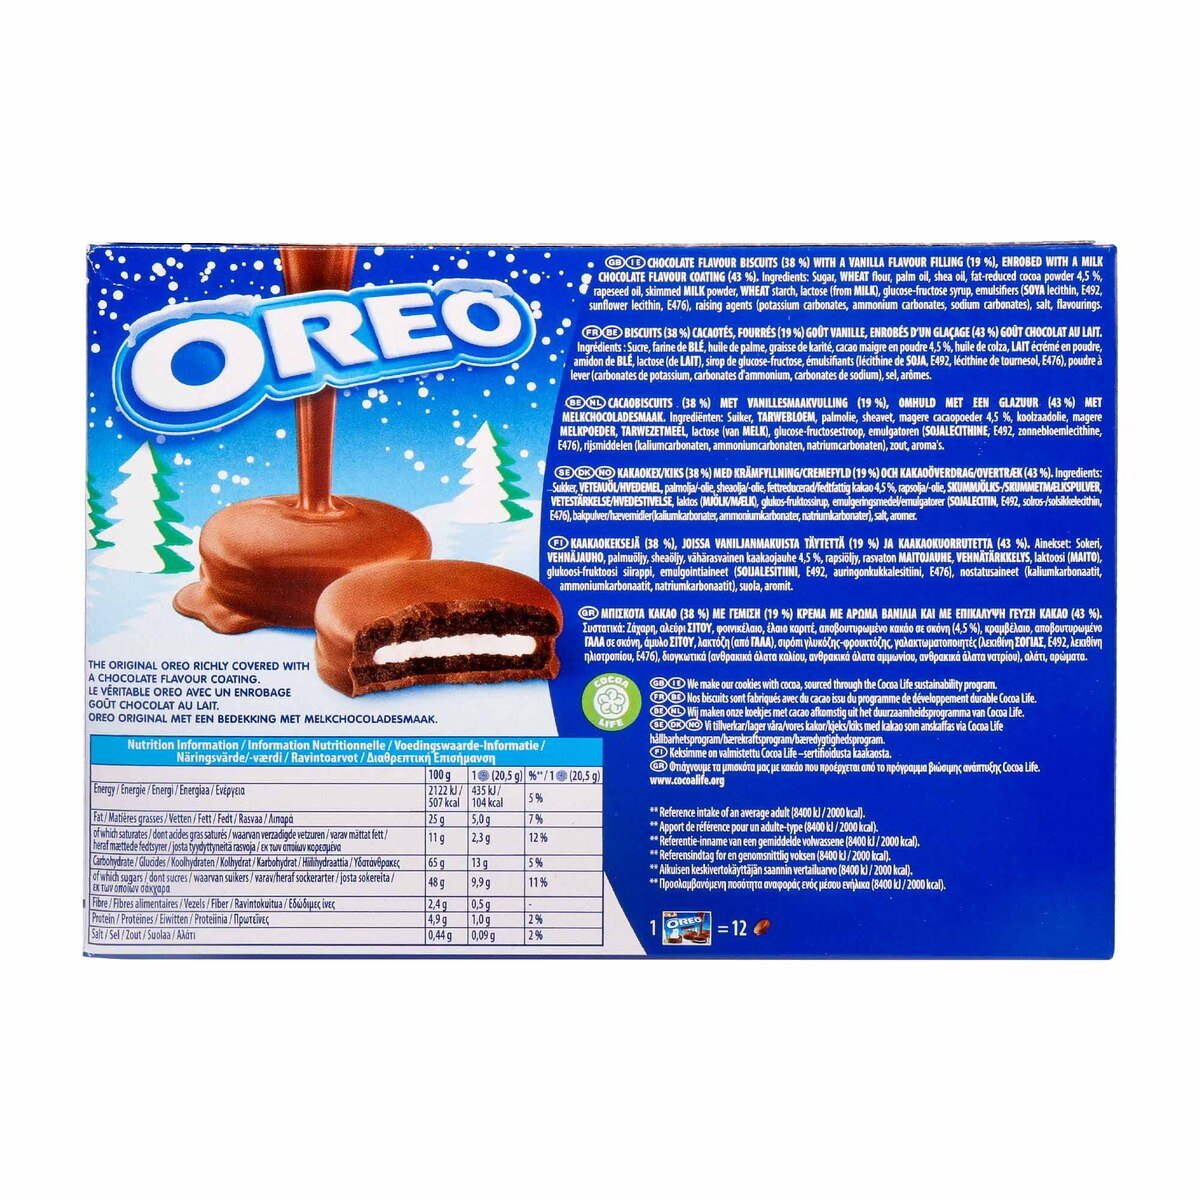 Nabisco Oreo Enrobed Chocolate Biscuits 246 g